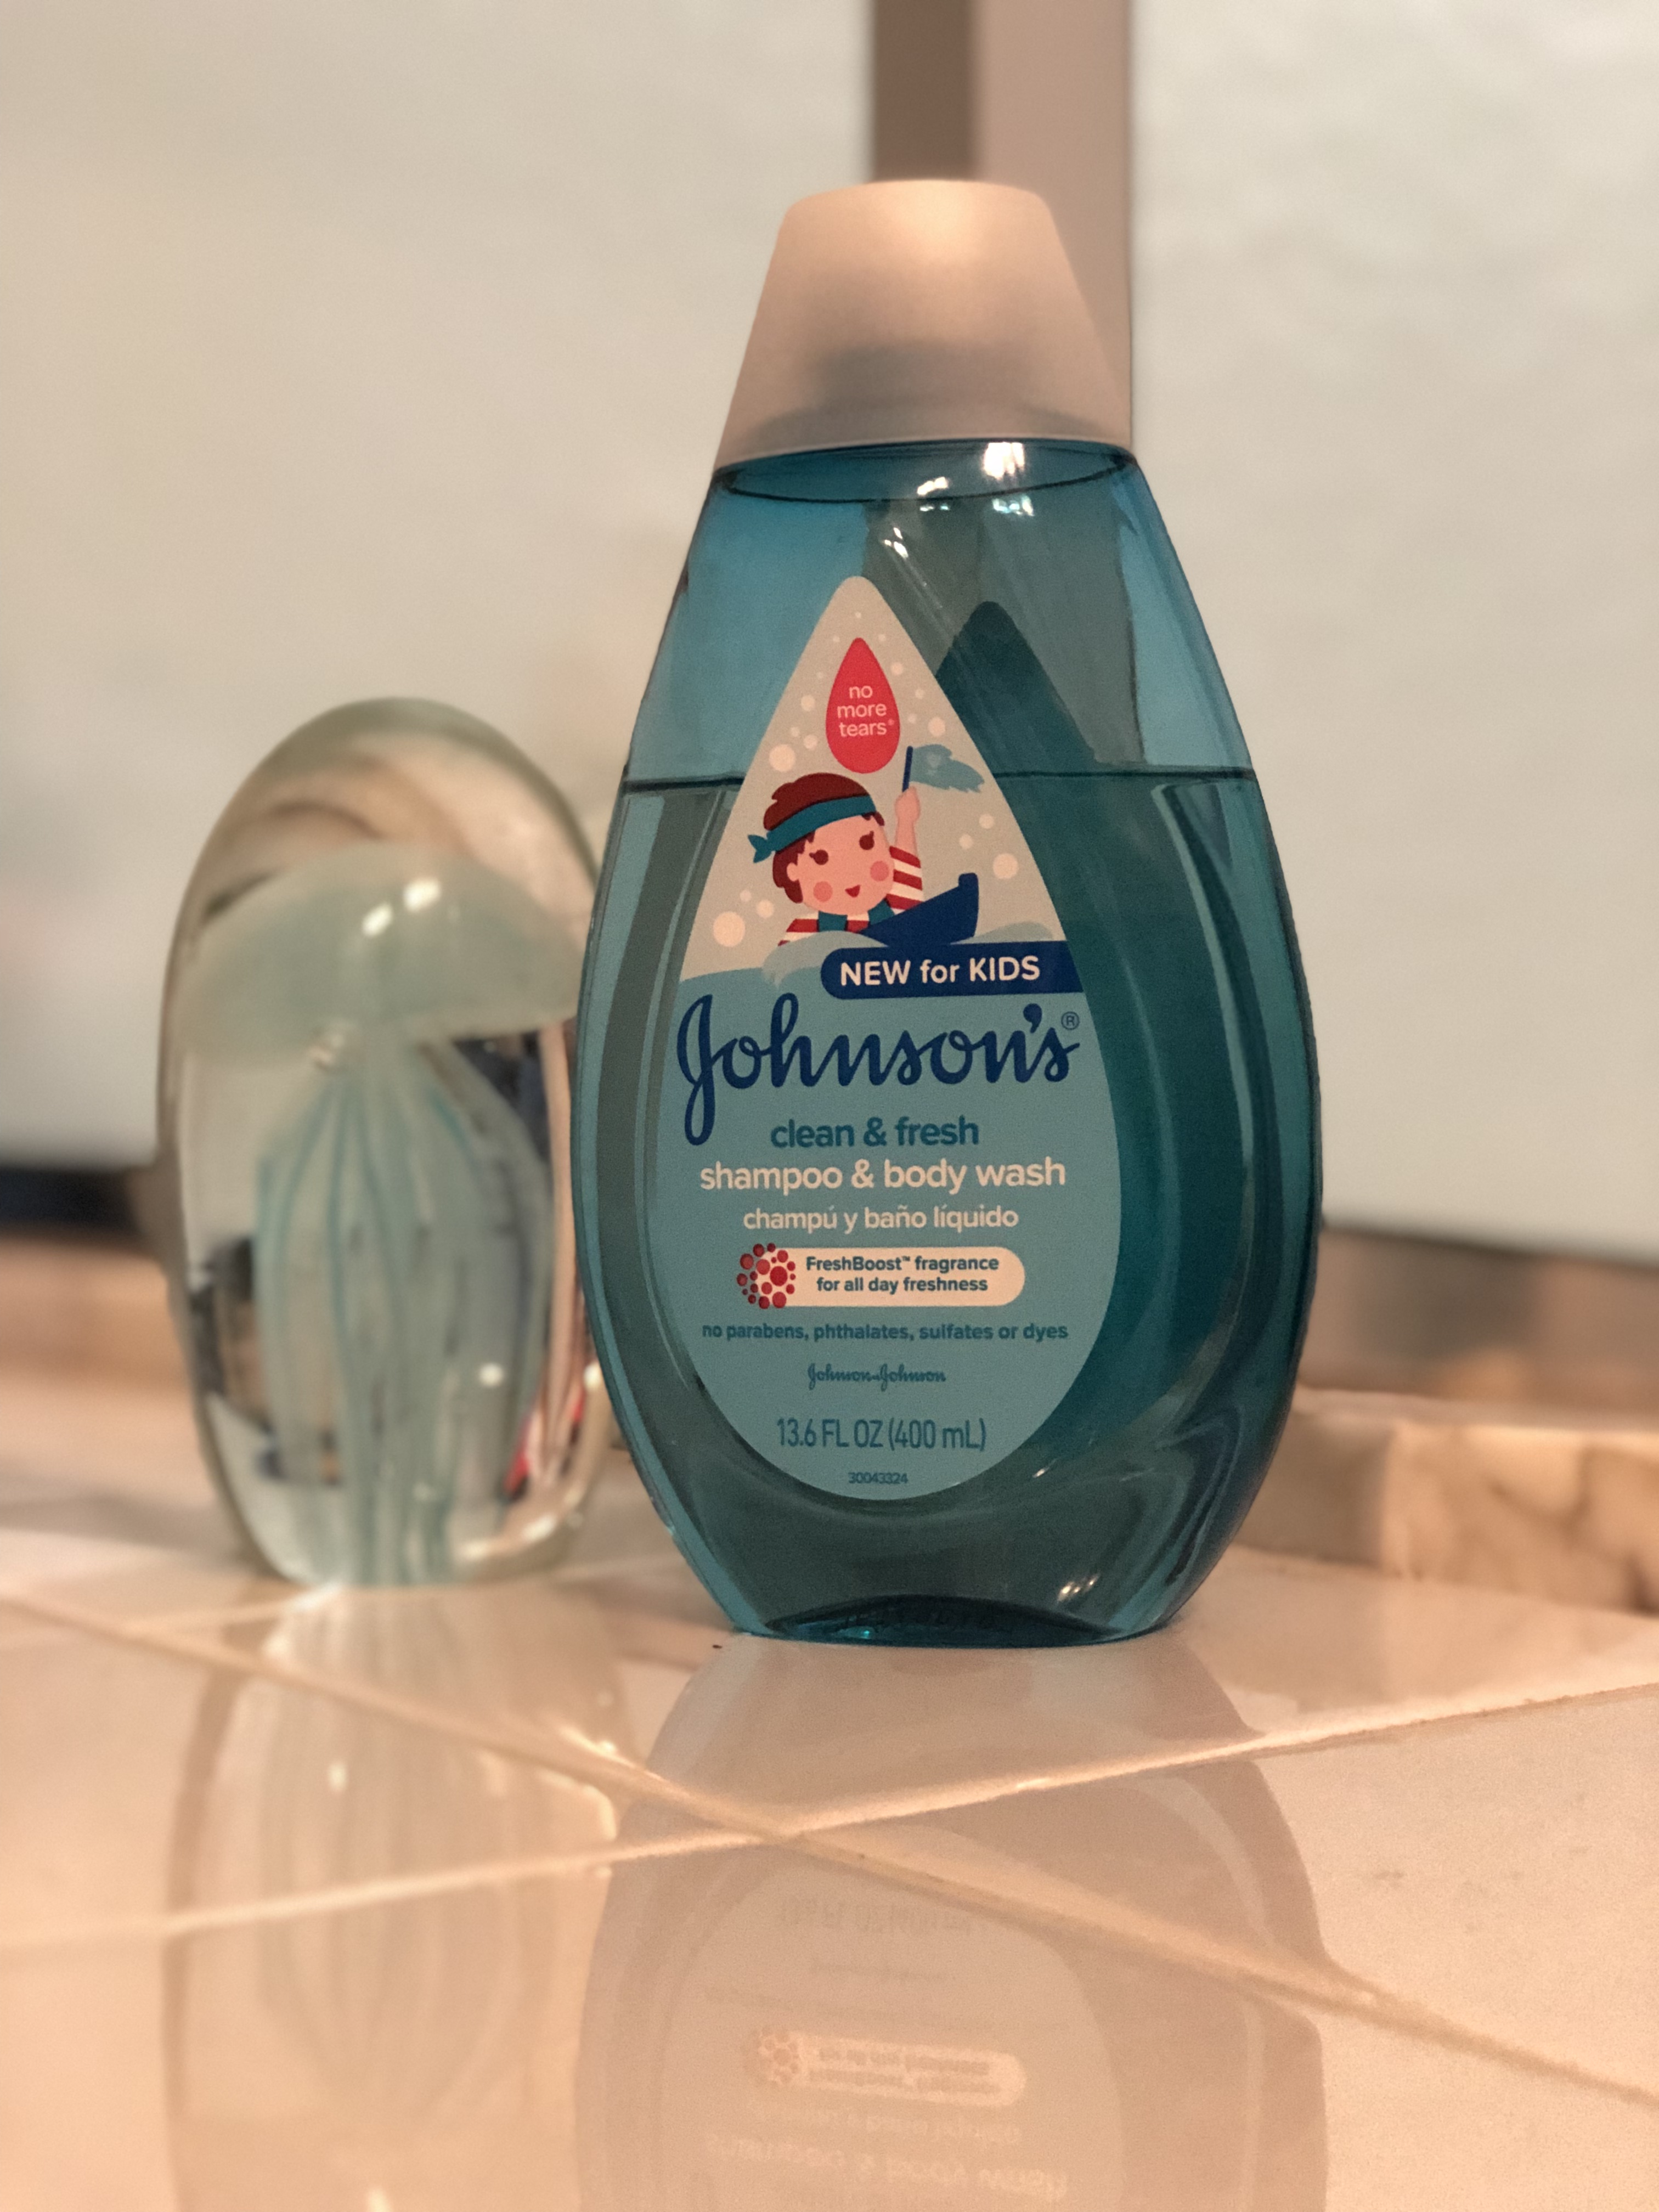 Sponsor | How to pick right hair products for your kids: For active kids, try Johnson's clean and fresh shampoo 